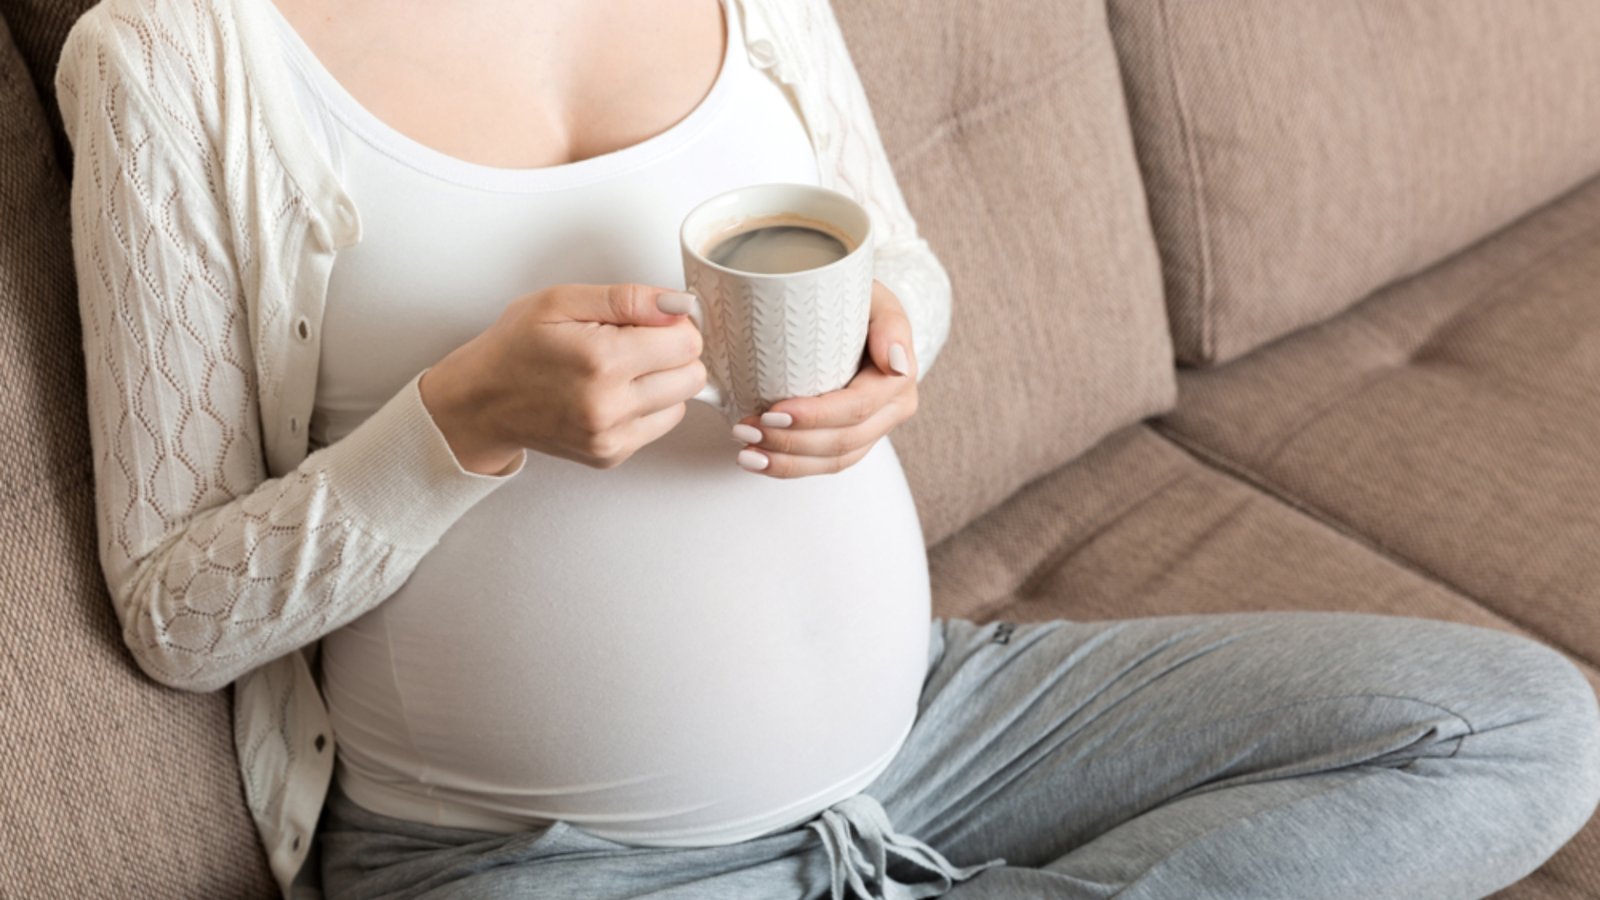 Can We Drink Coffee During Pregnancy